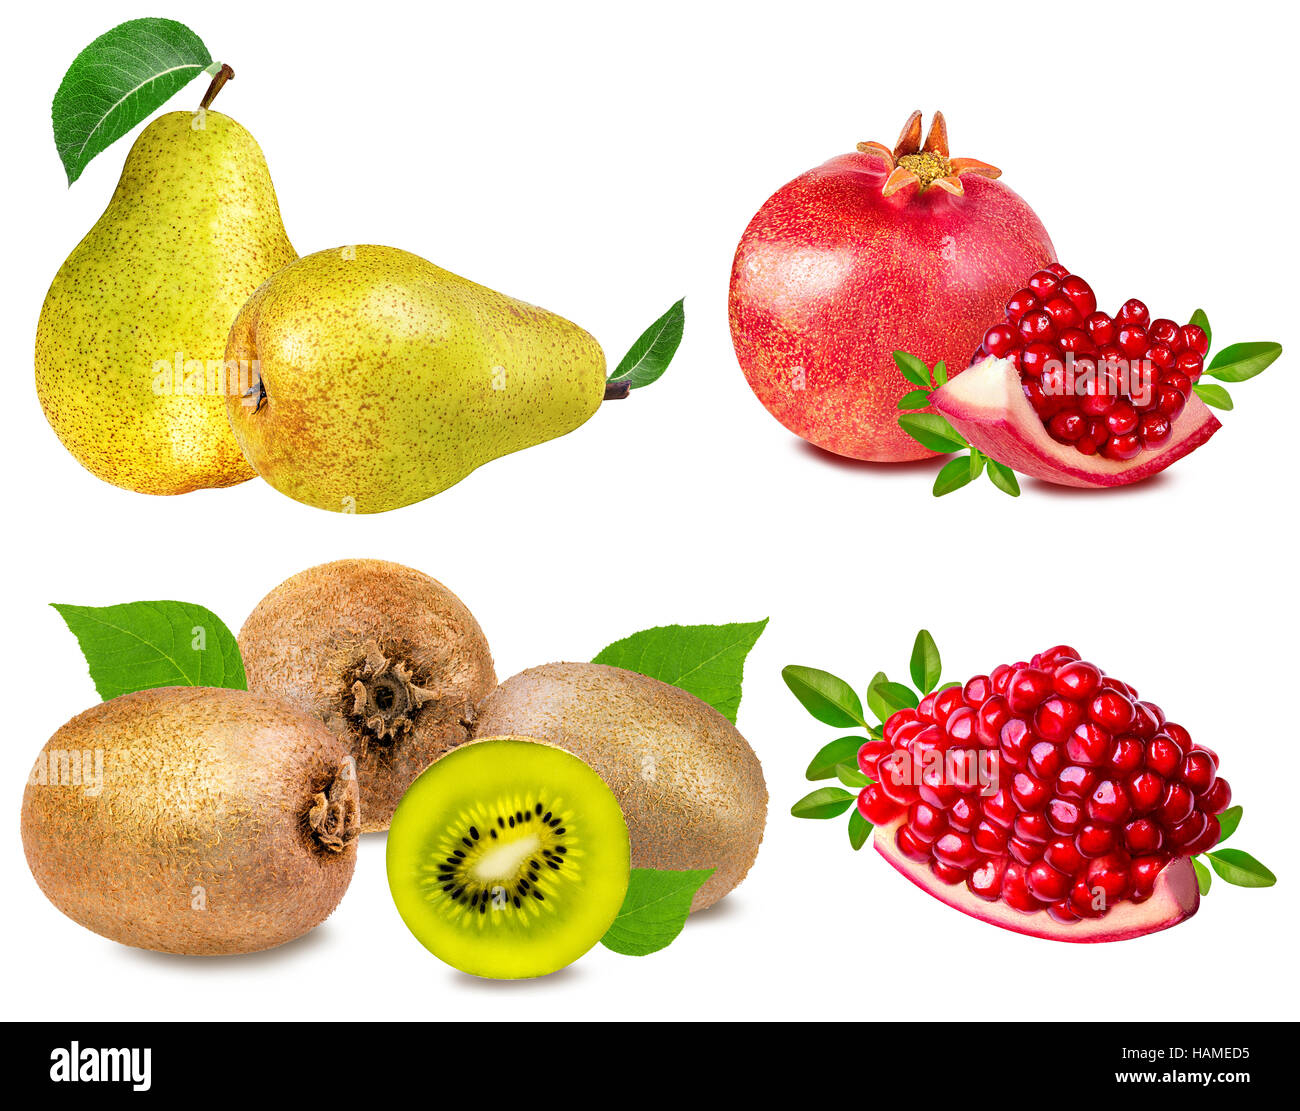 Collection of fruits isolated on white background Stock Photo